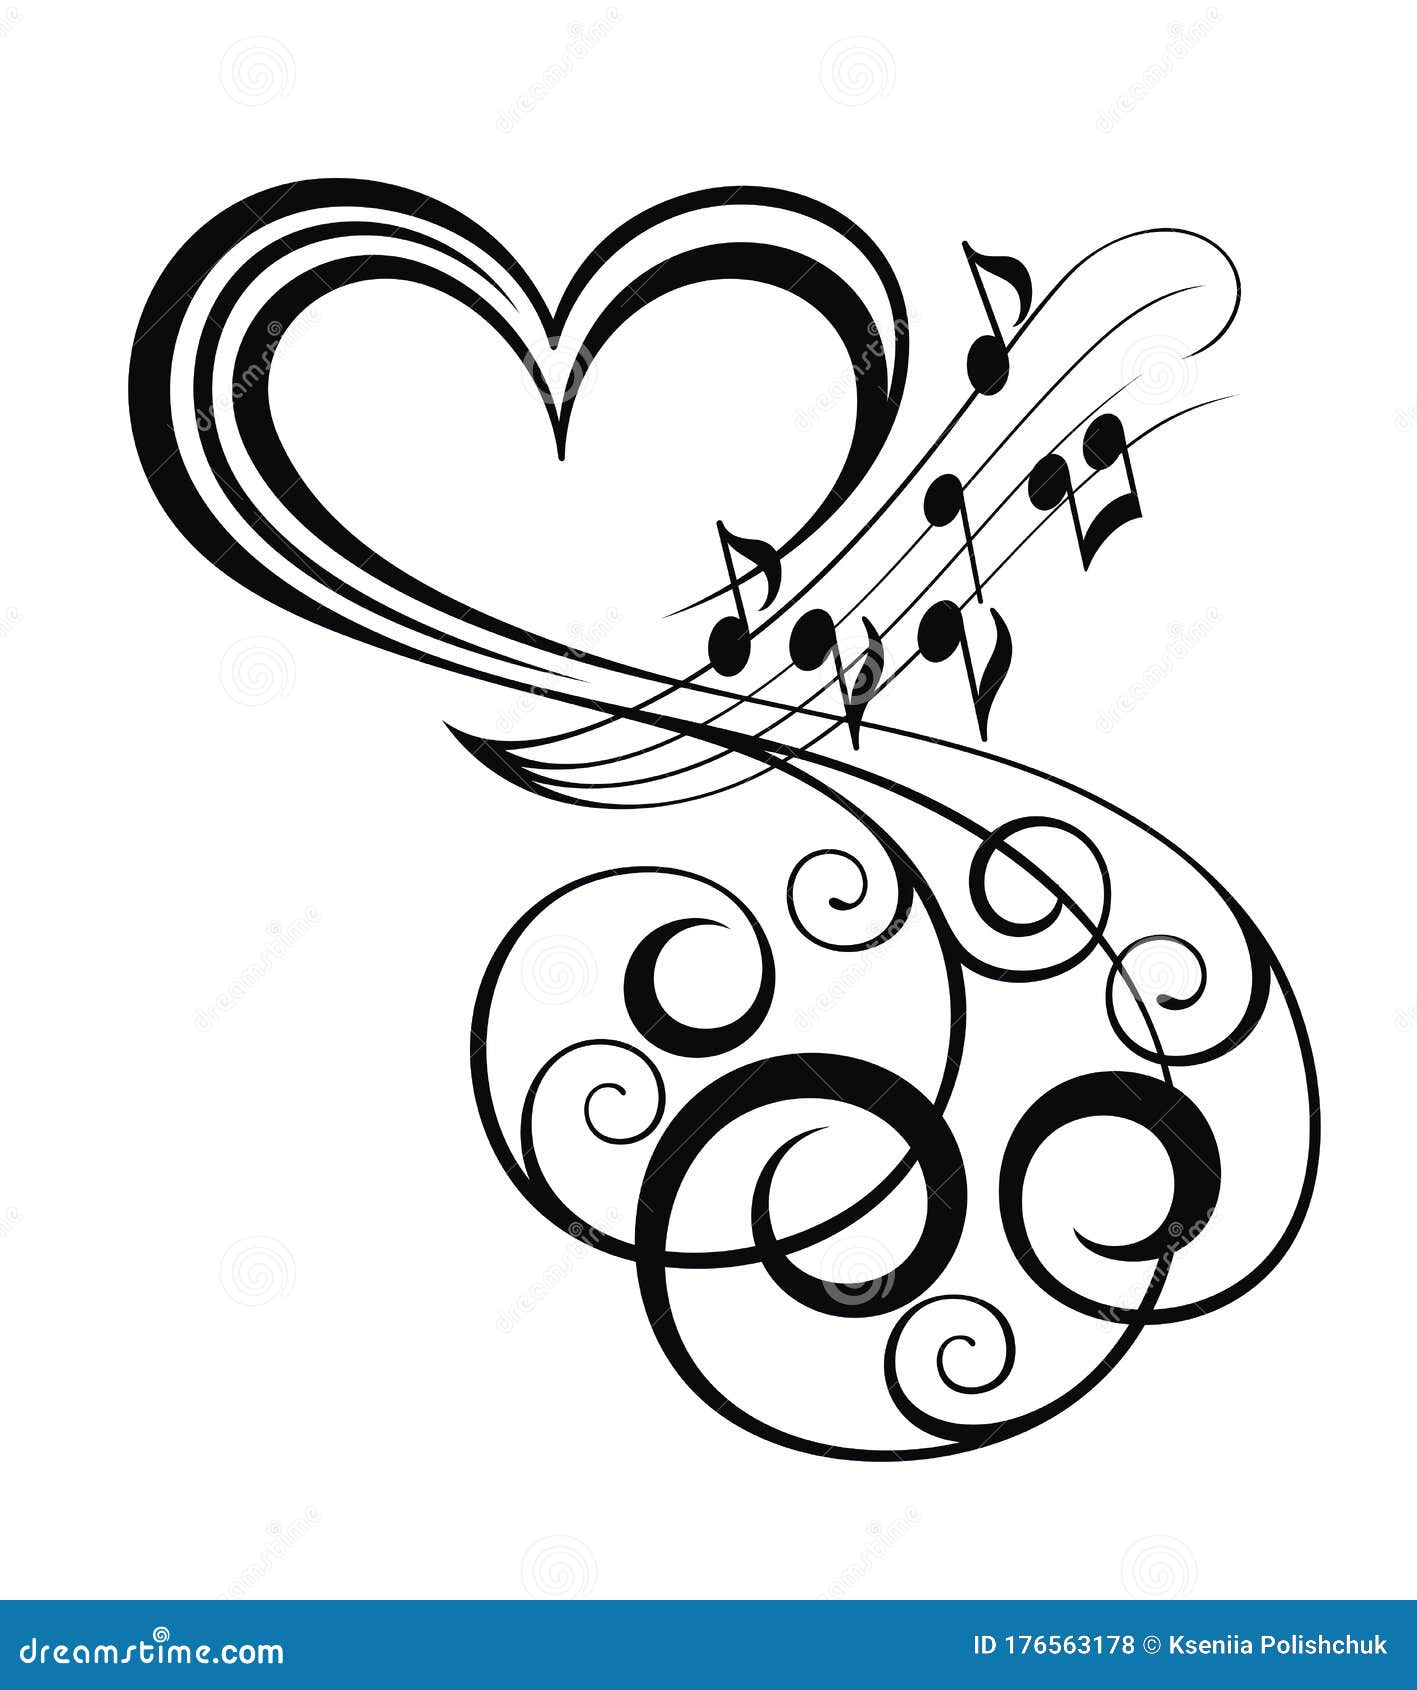 Best Photos of Music Note Heart  Music Note Heart Tattoo Heart    ClipArt Best  ClipArt Best